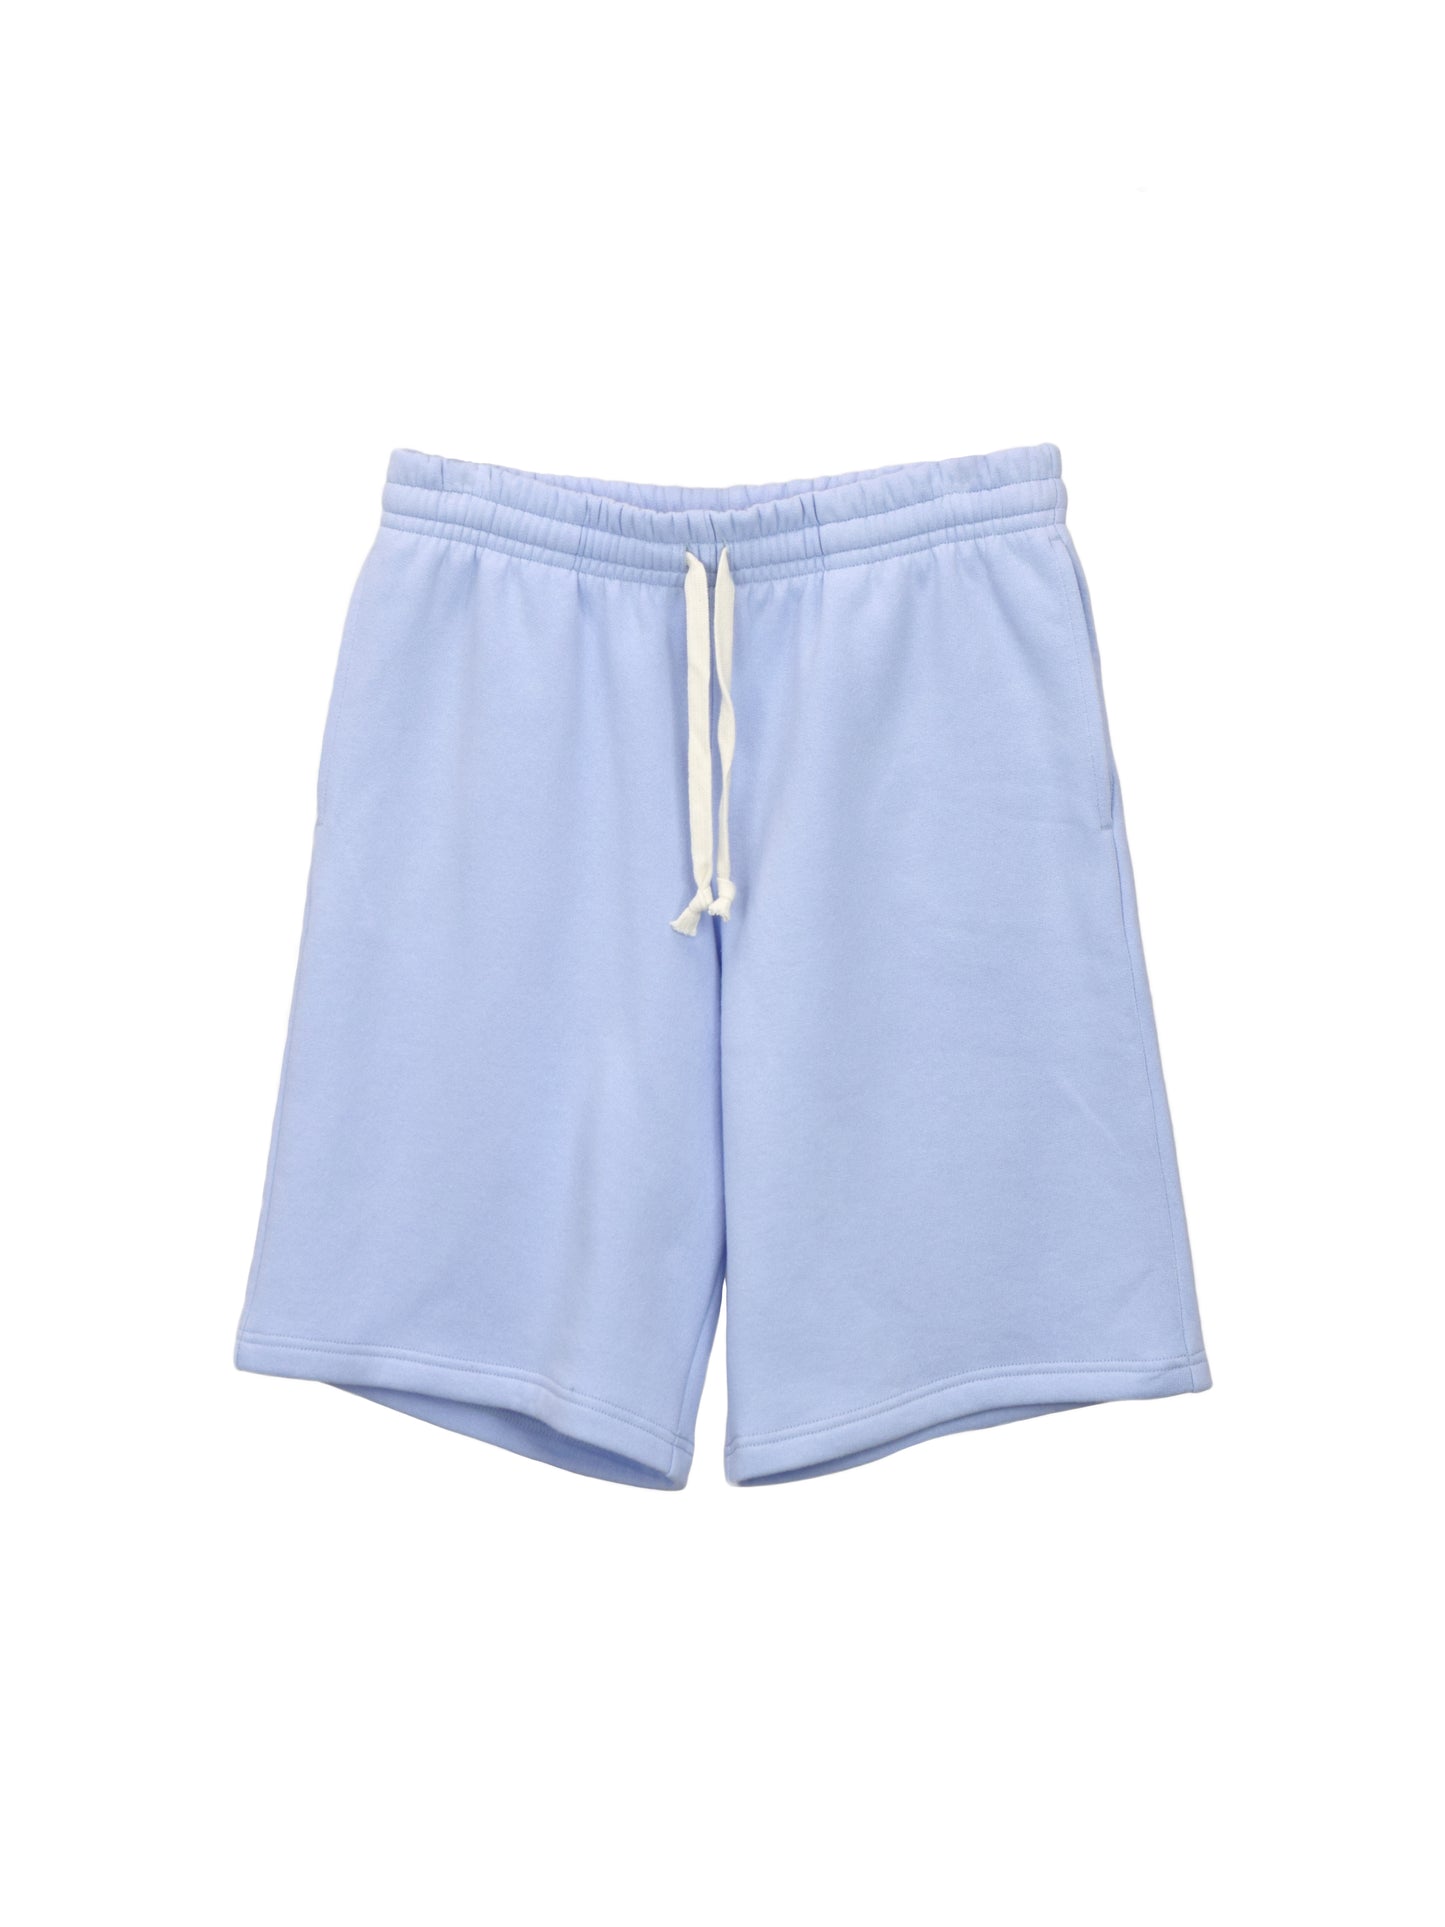 Frontal view of airy blue longshorts, showing white drawstrings and waistband.